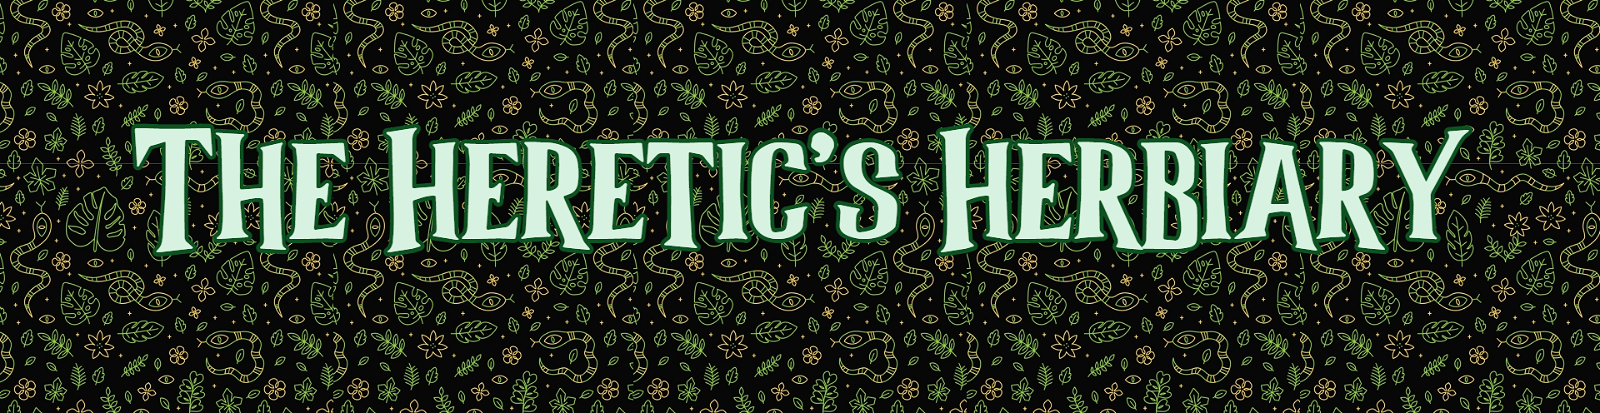 The Heretic's Herbiary vol #06